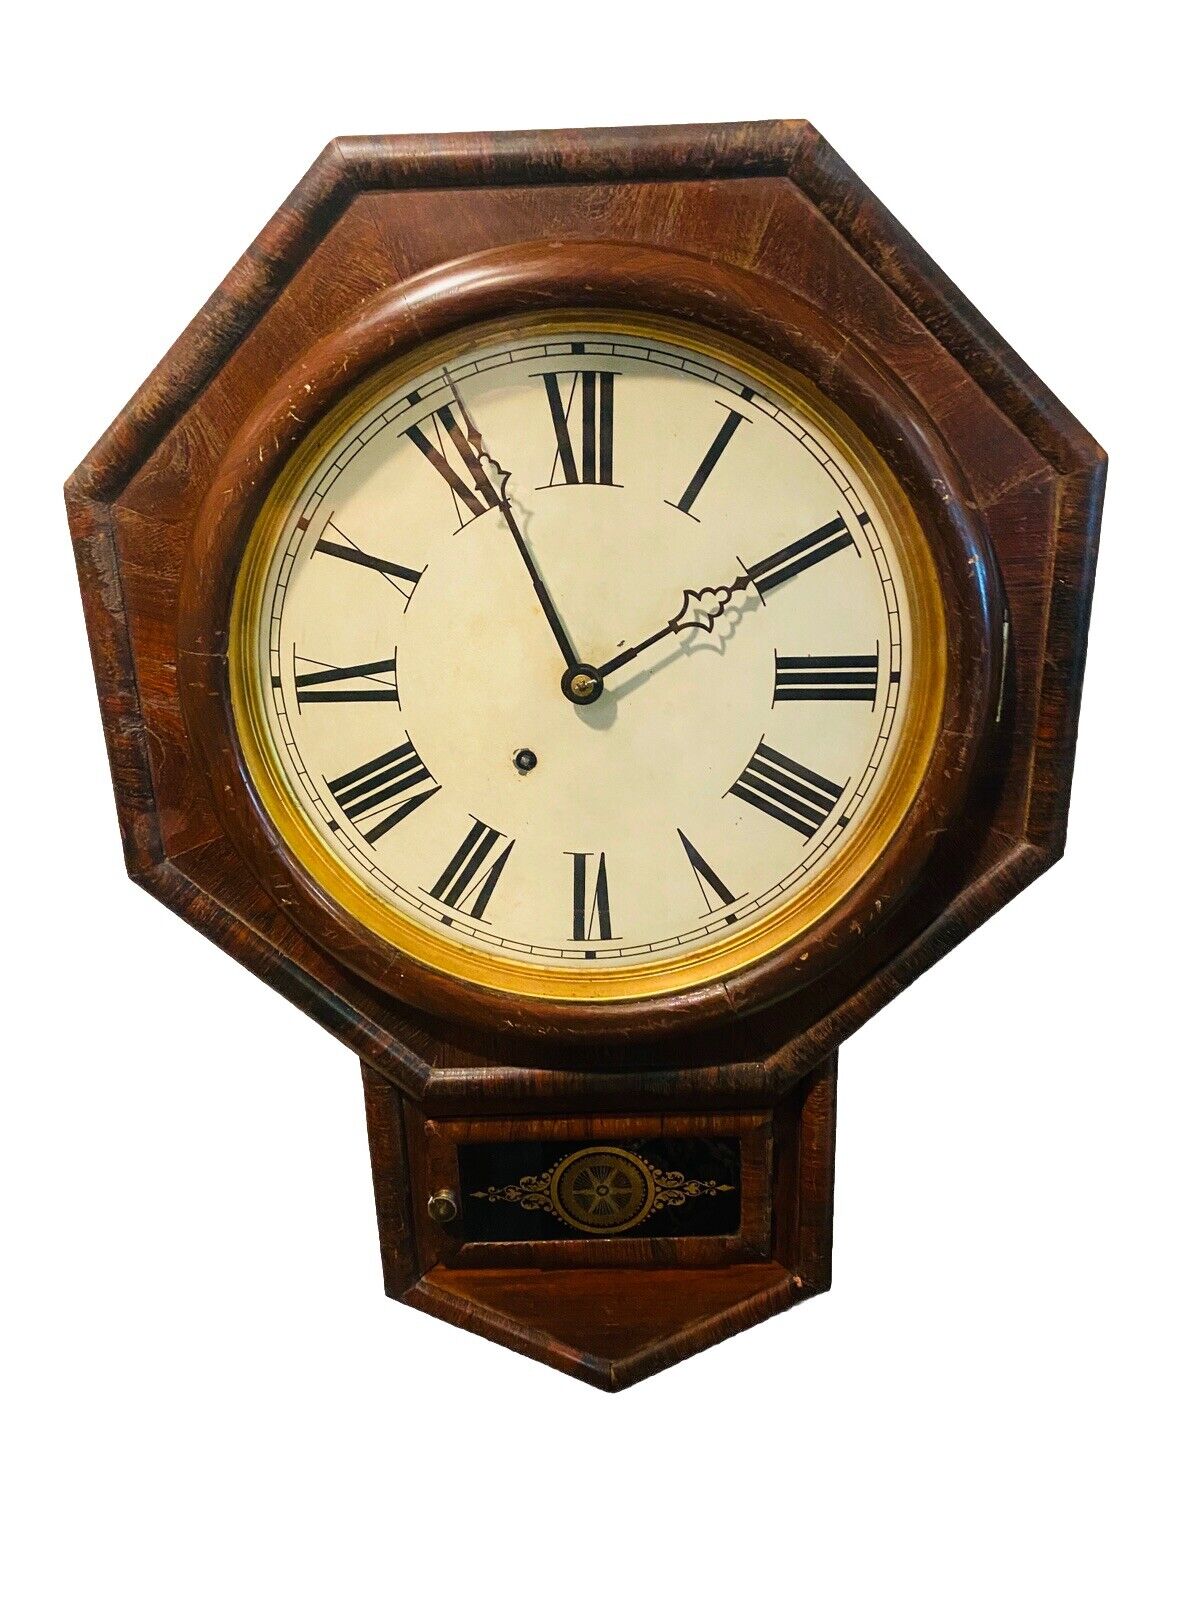 Antique Ansonia Schoolhouse Short Drop Style Wall Clock Runs And Chimes